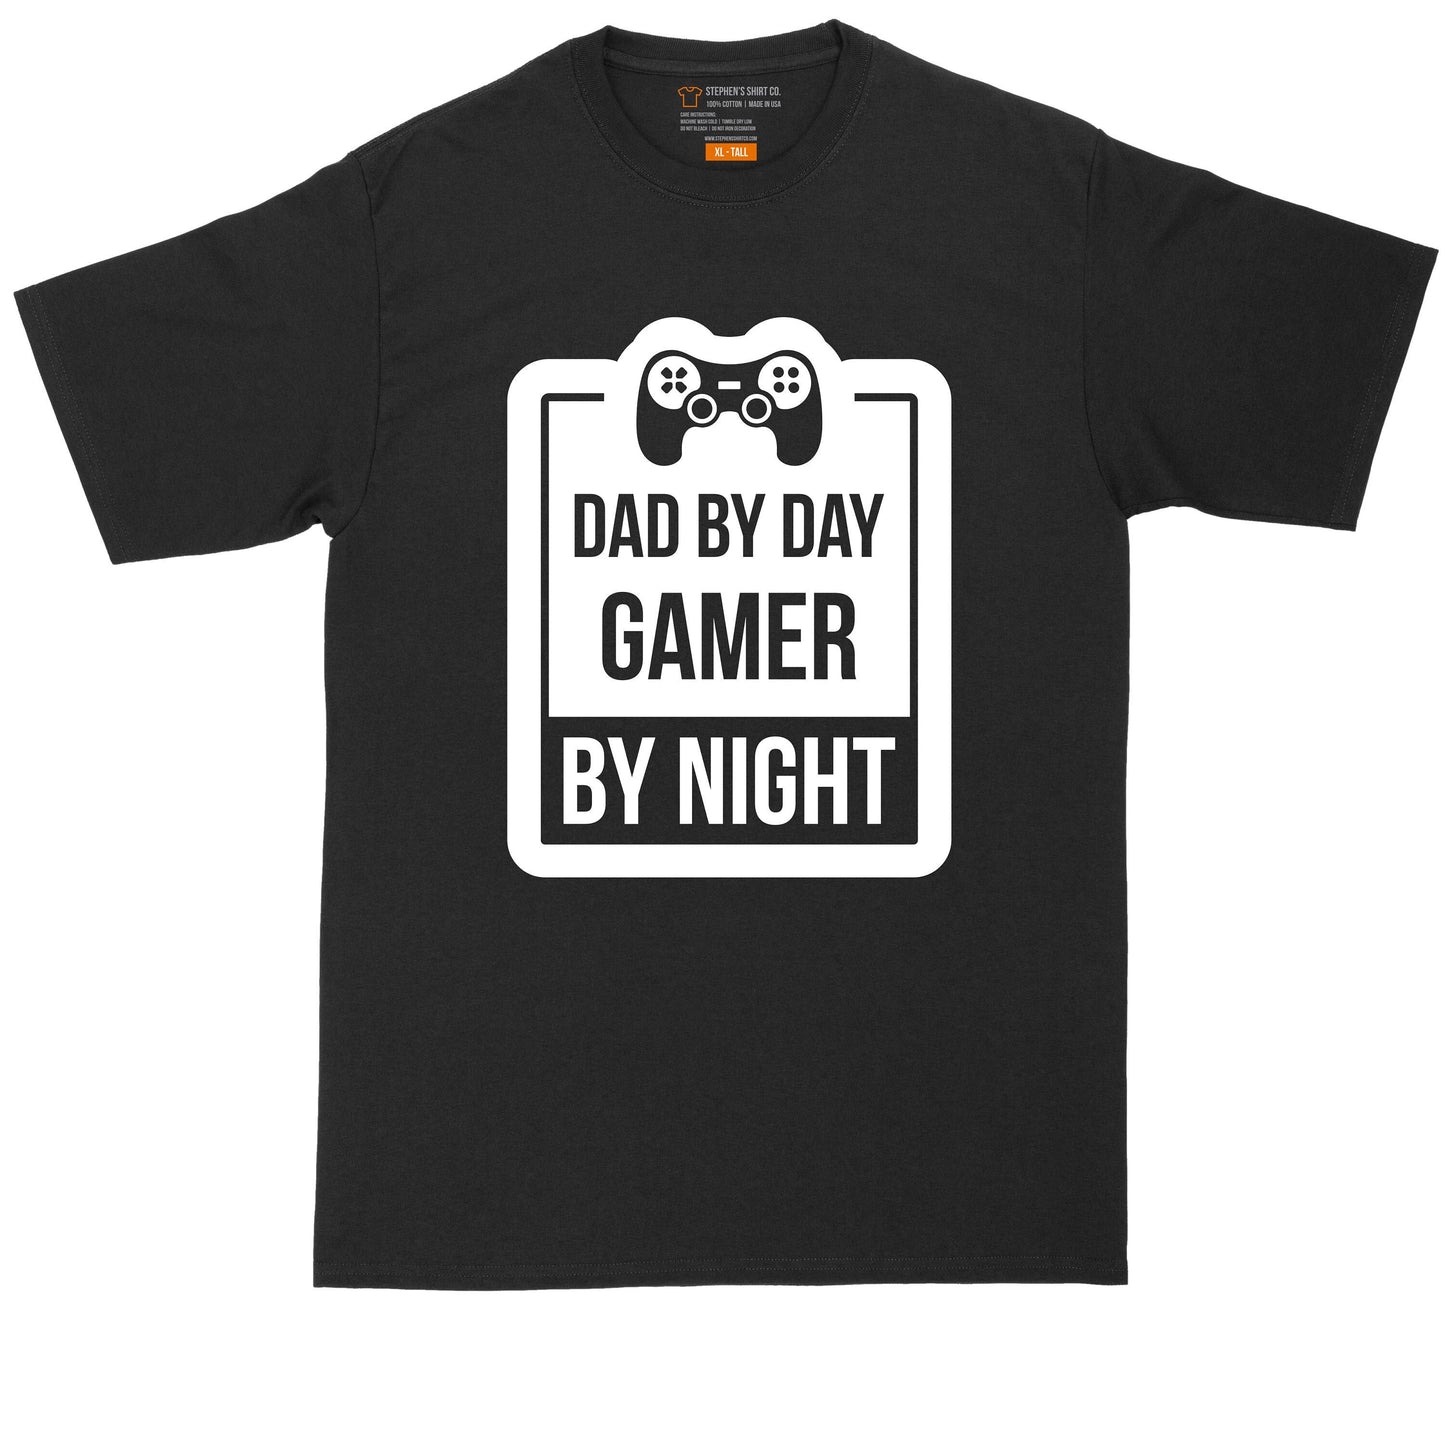 Dad by Day Gamer by Night | Big and Tall Men | Funny Shirt | Video Game Lover | Big Guy Shirt | Fathers Day Gift